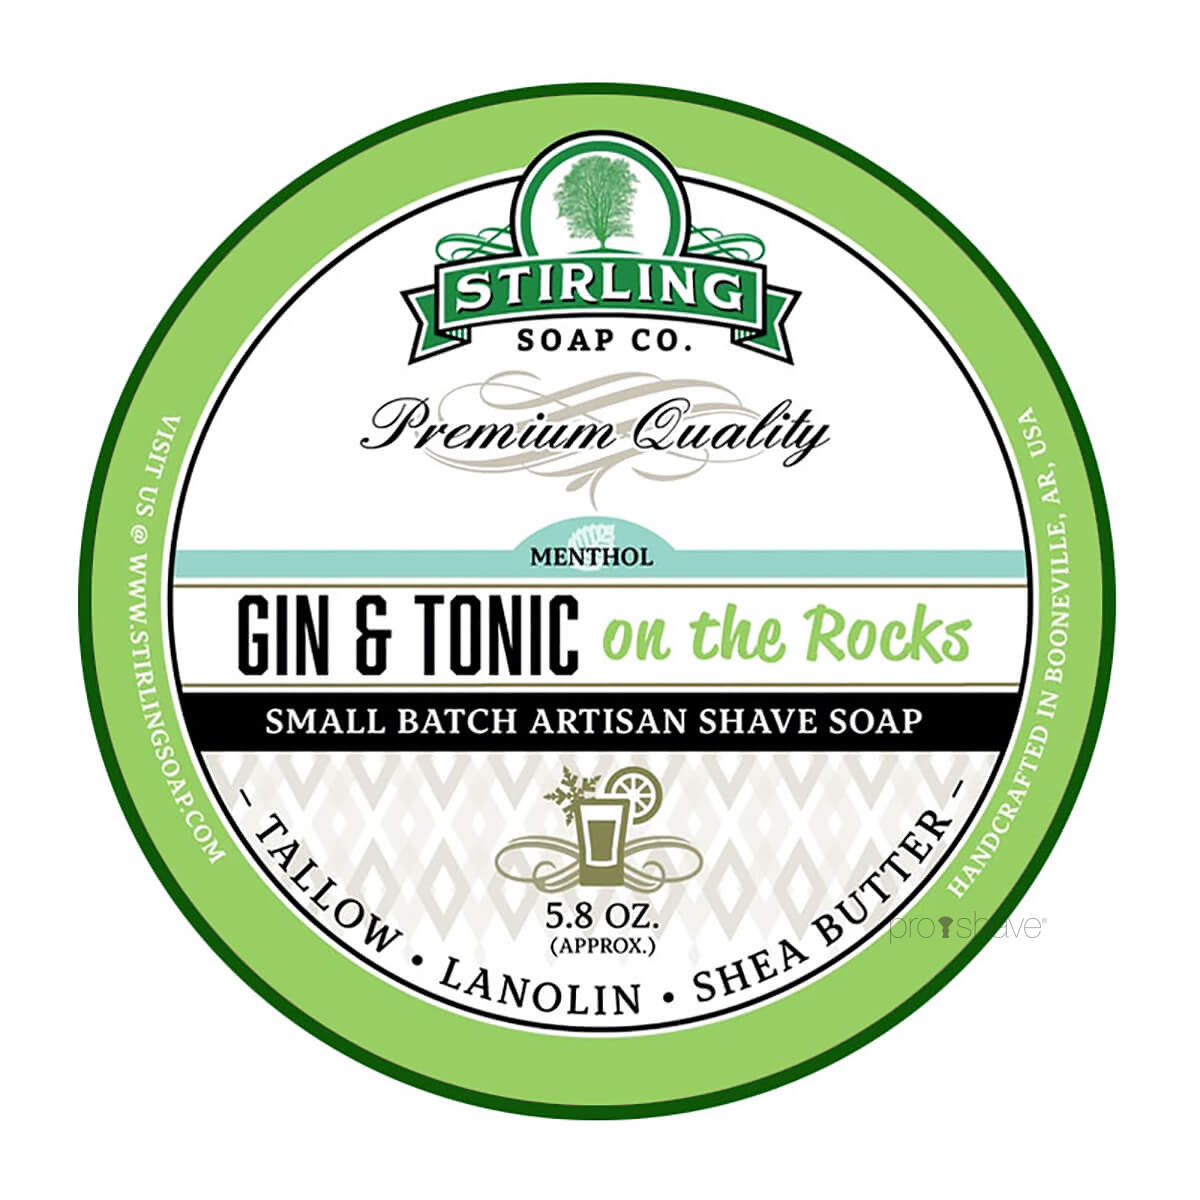 Stirling Soap Co. Barbersæbe, Gin & Tonic on the Rocks, 170 ml.